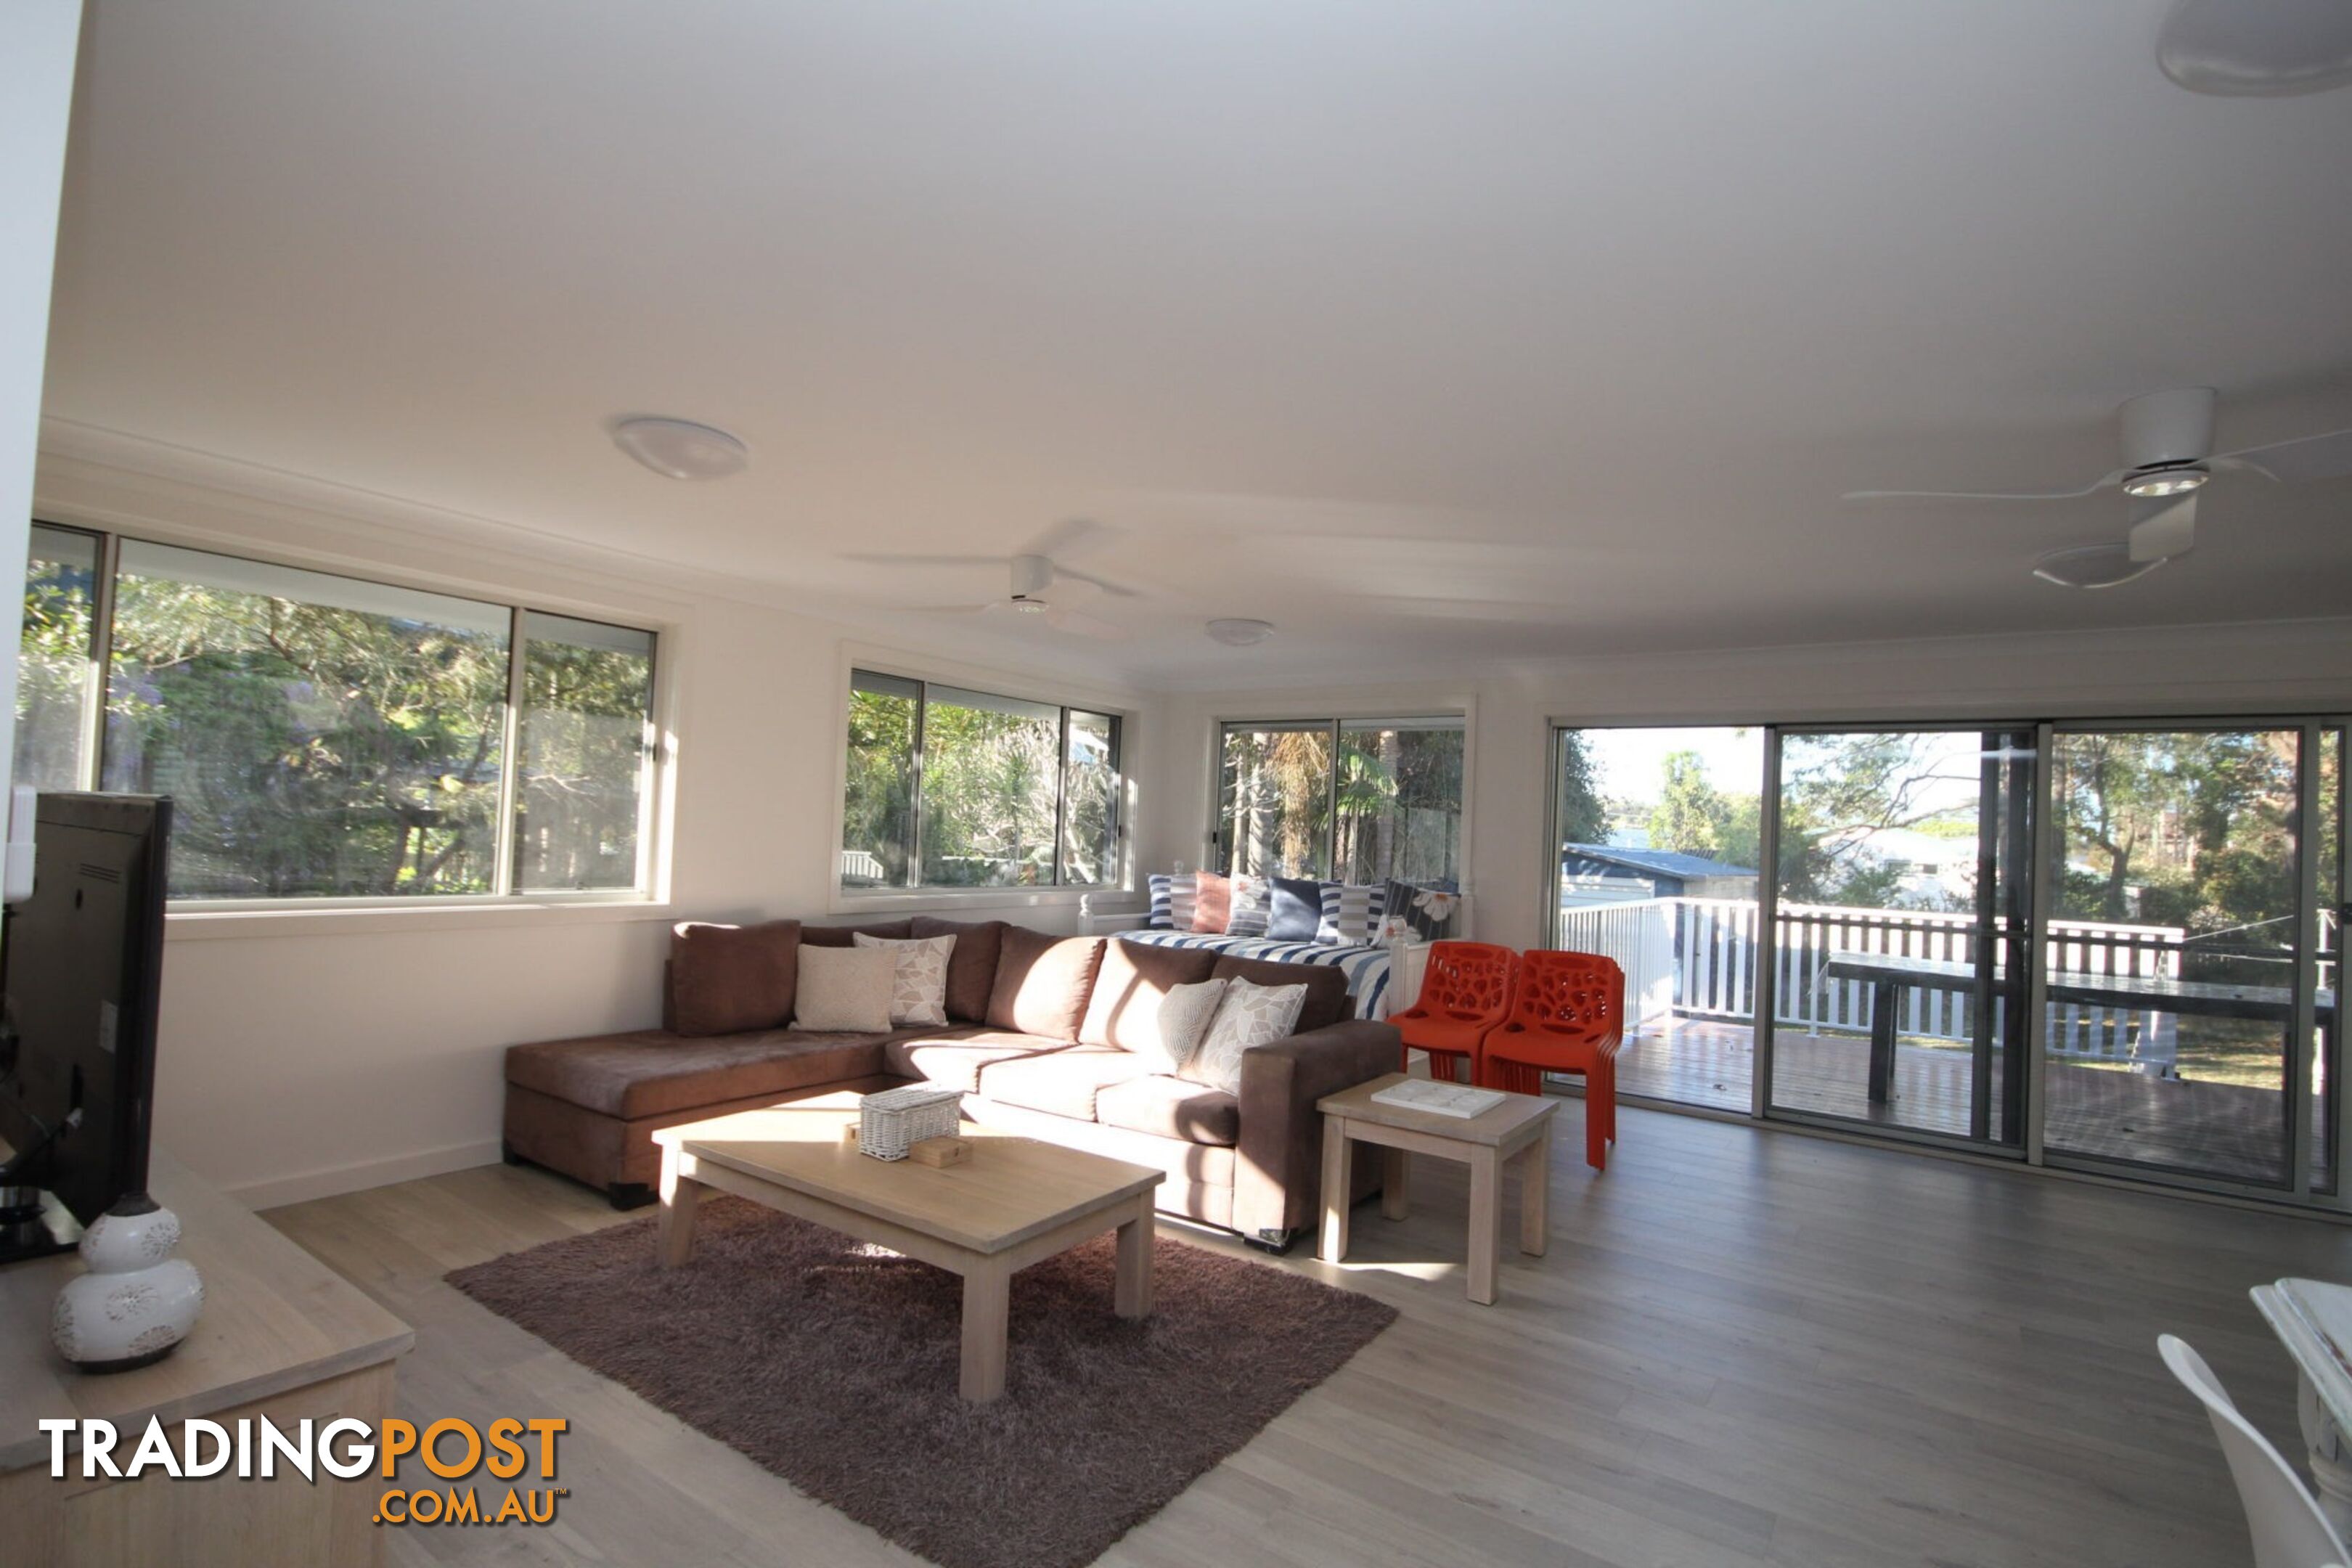 6 Coral Street NORTH HAVEN NSW 2443